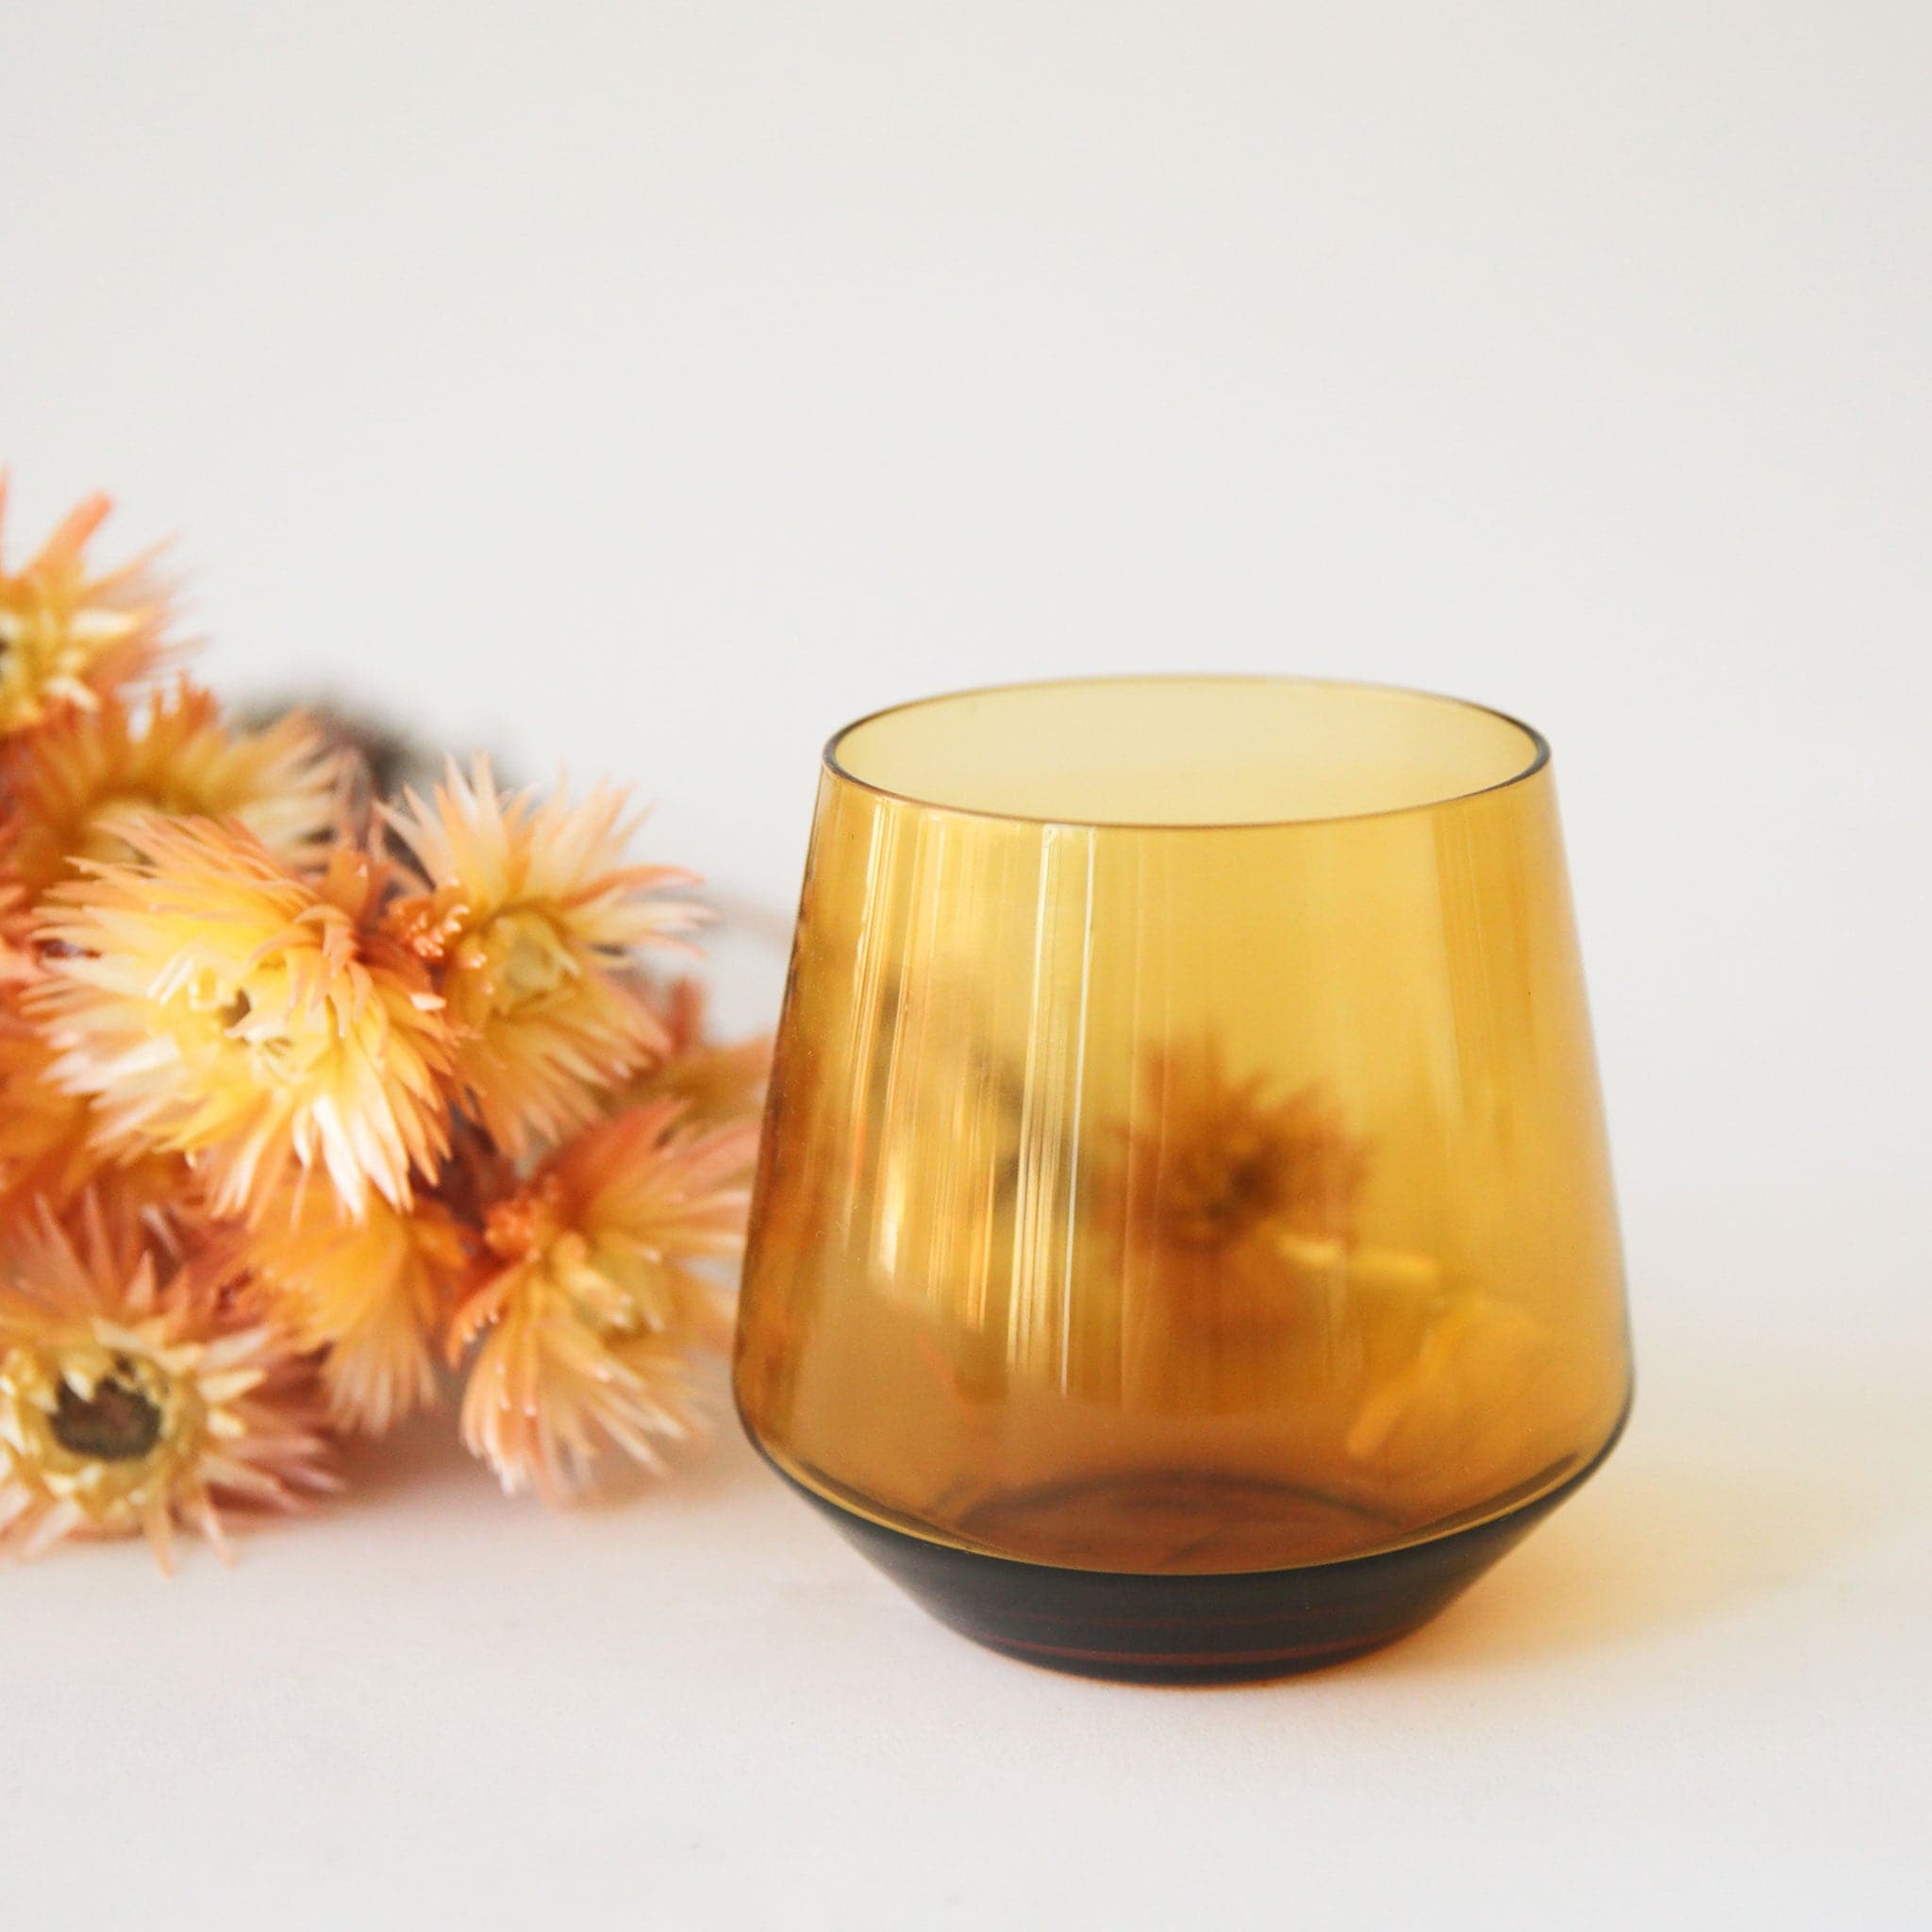 An amber colored stemless drinking glass with an angled / slightly curved bottom edge and staged next to orange dried florals.